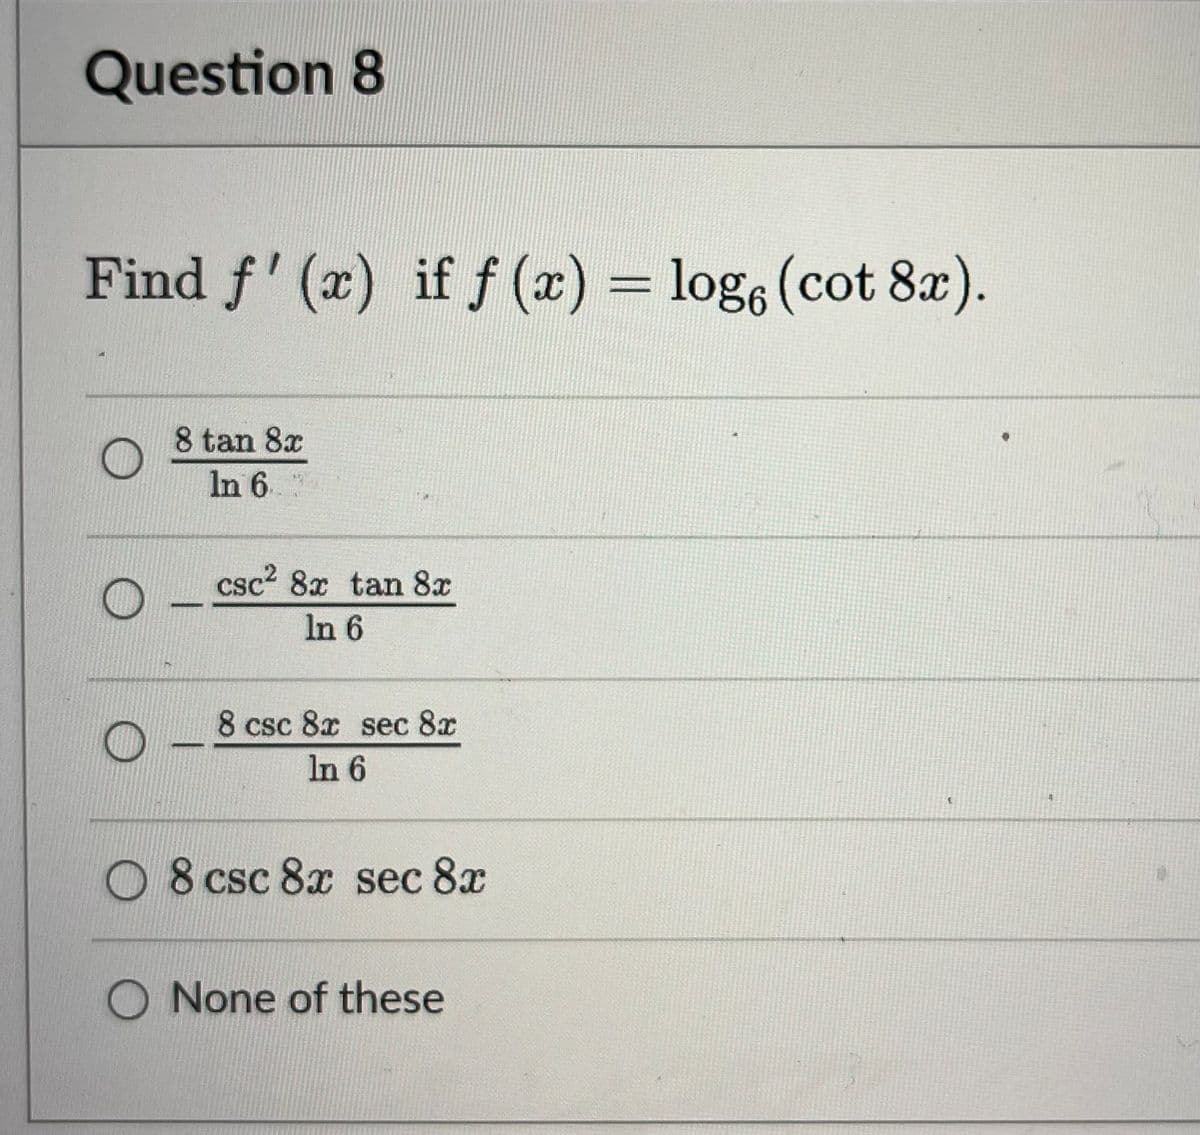 Question 8
Find f'(x) if f (x) = loge (cot 8x).
8 tan 8x
ln 6.
O
-
csc² 8x tan 8x
In 6
8 csc 8x sec 8x
In 6
O 8 csc 8x sec 8x
O None of these